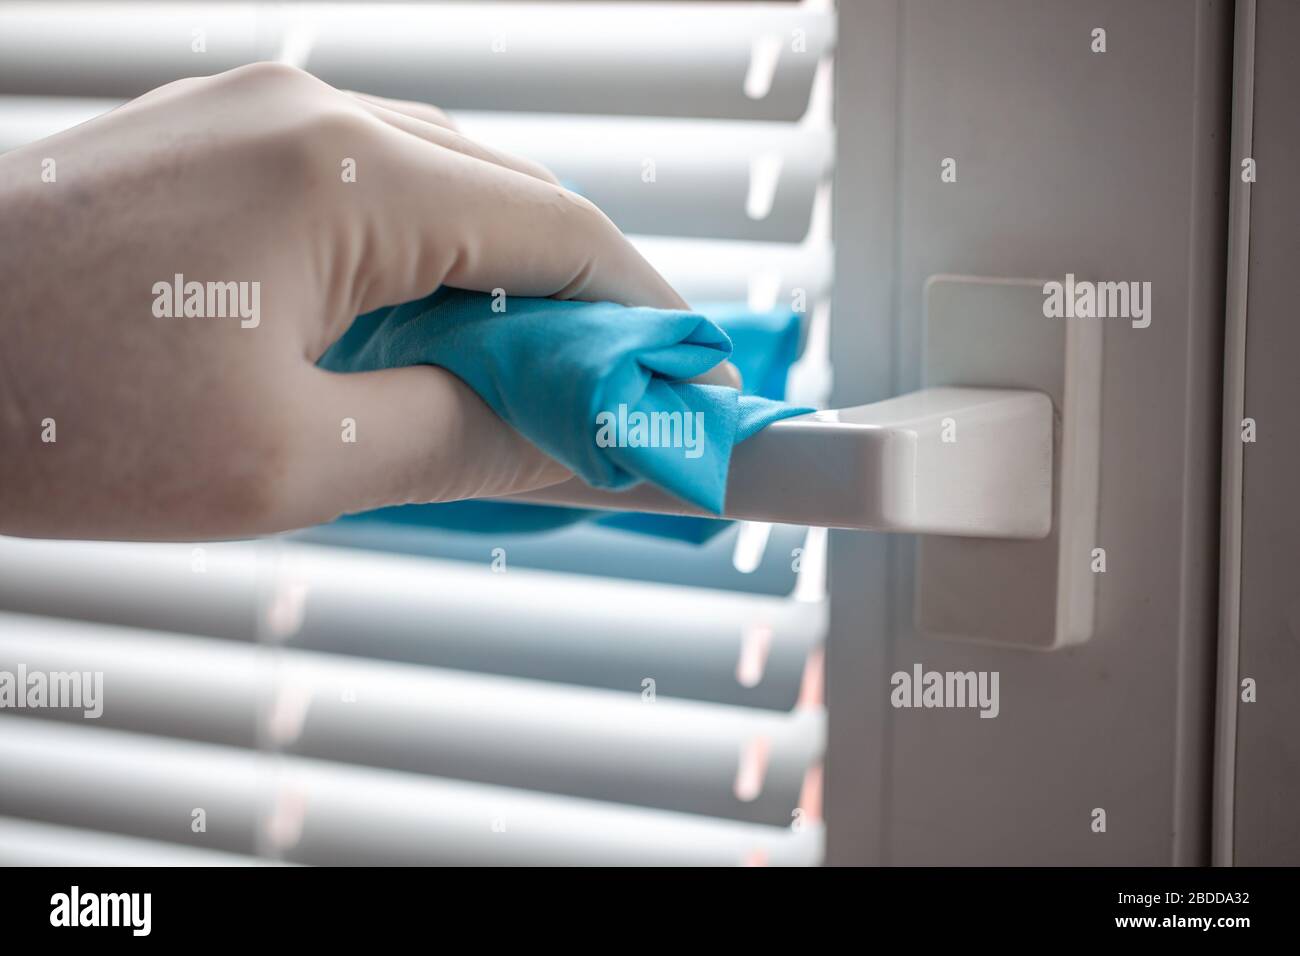 Cleaning and disinfection of door handles and windows handles with cleaning towel against viruses and germs. Stock Photo